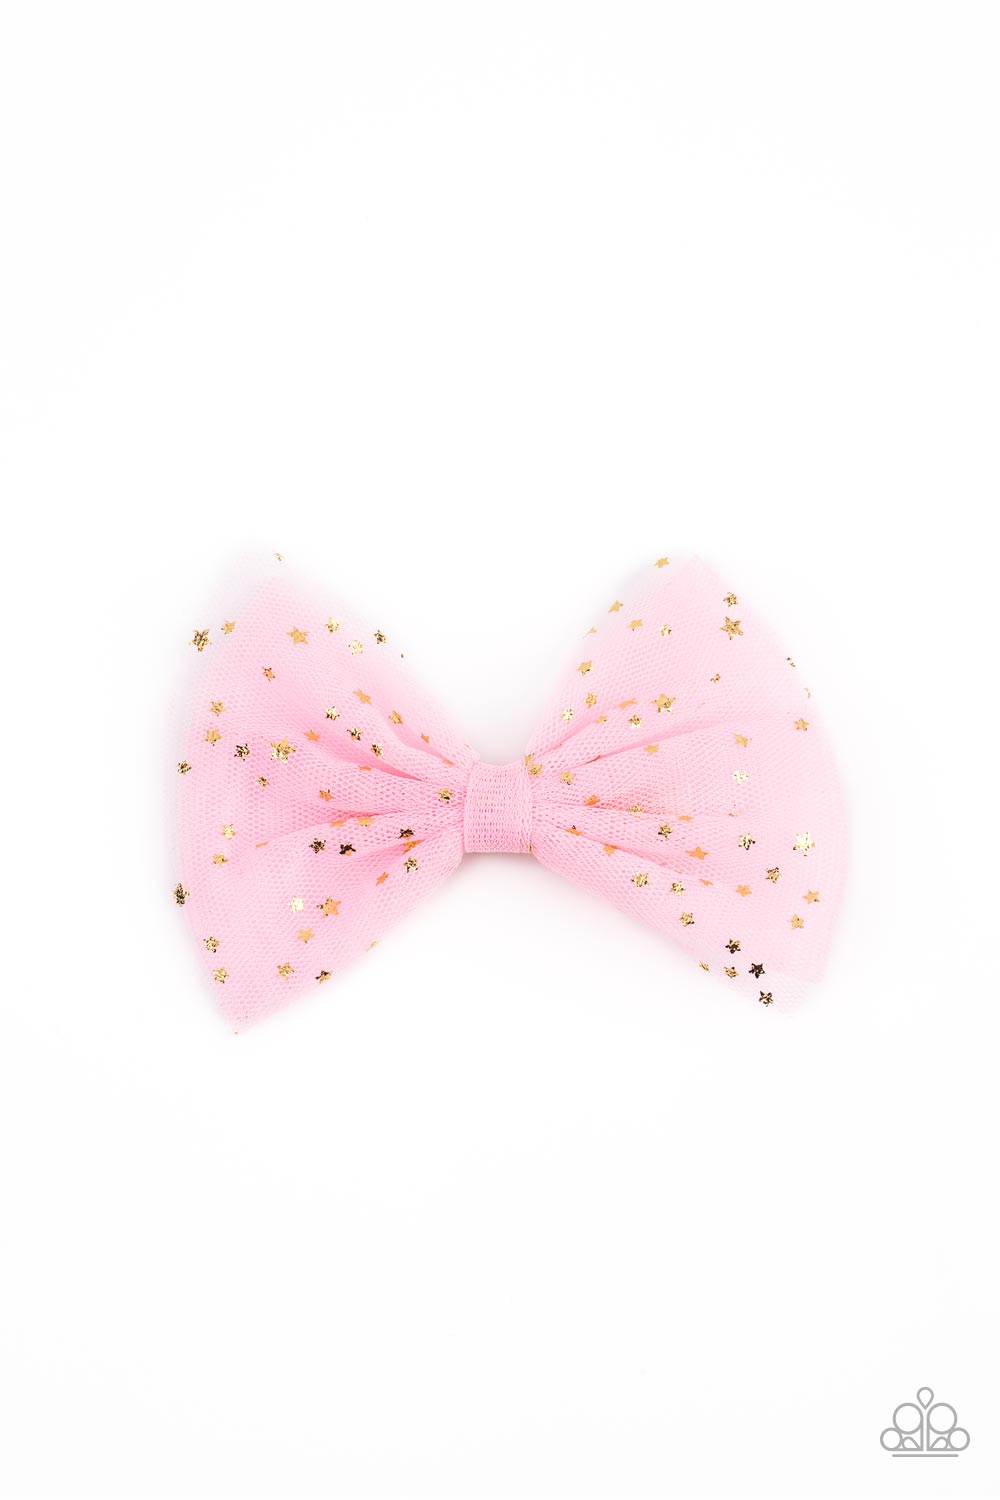 PRE-ORDER - Paparazzi Twinkly Tulle - Pink - Hair Clip - $5 Jewelry with Ashley Swint